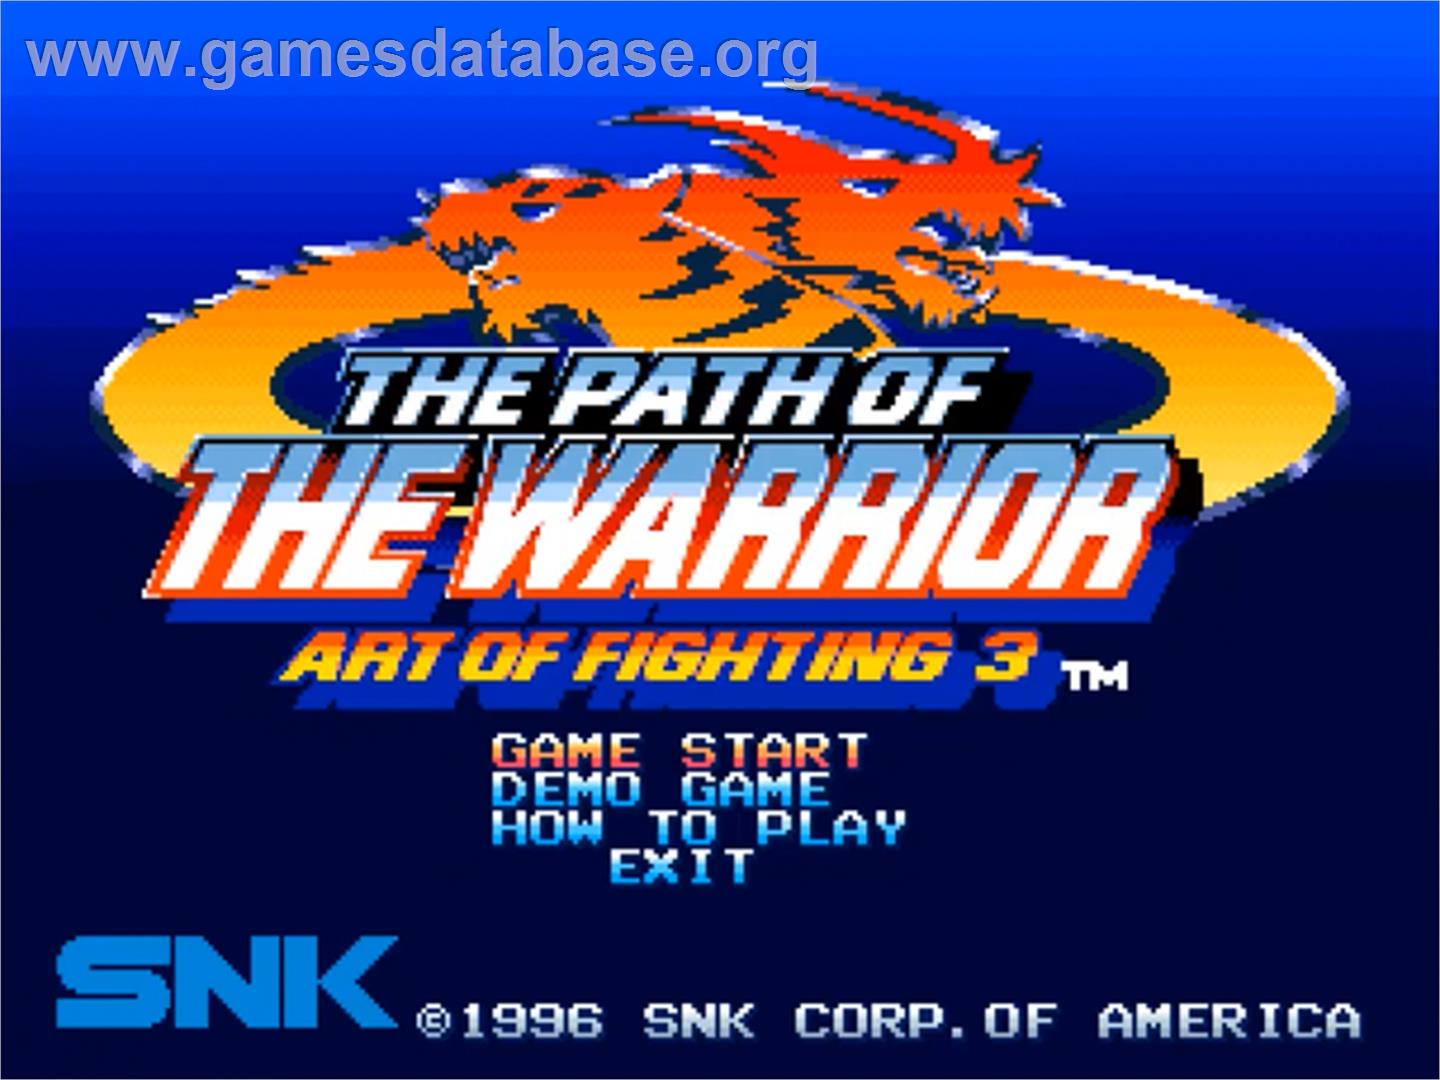 Art of Fighting 3: The Path of The Warrior - SNK Neo-Geo CD - Artwork - Title Screen